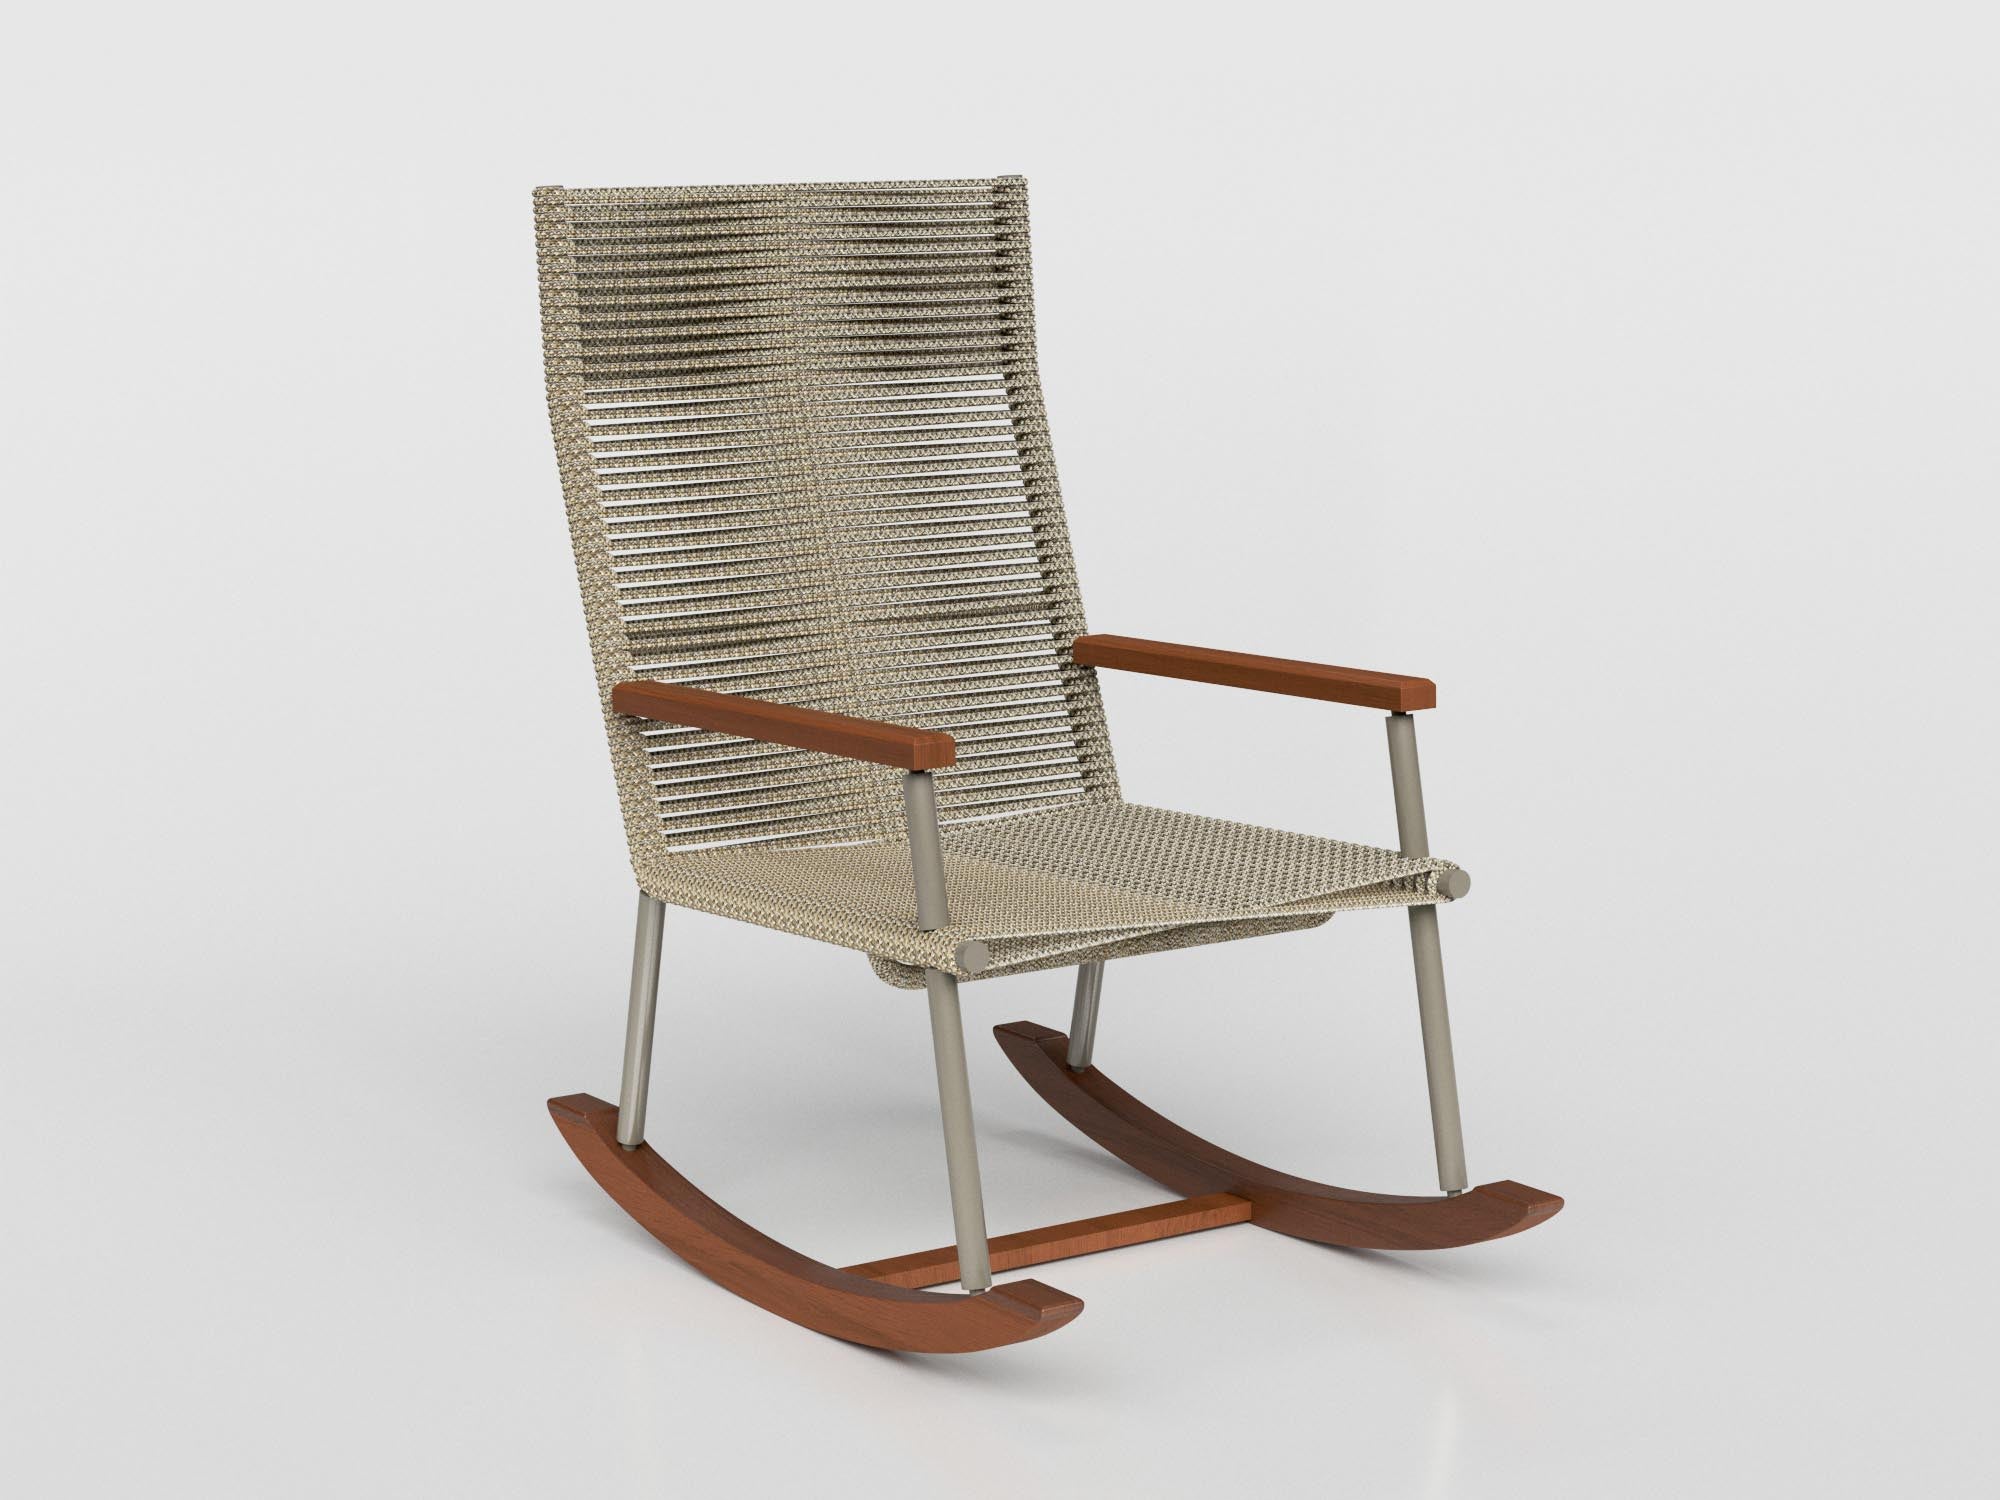 Bora Bora rocking chair made of nautical rope and gray aluminum with wooden arm and foot support, designed by Luciano Mandelli 